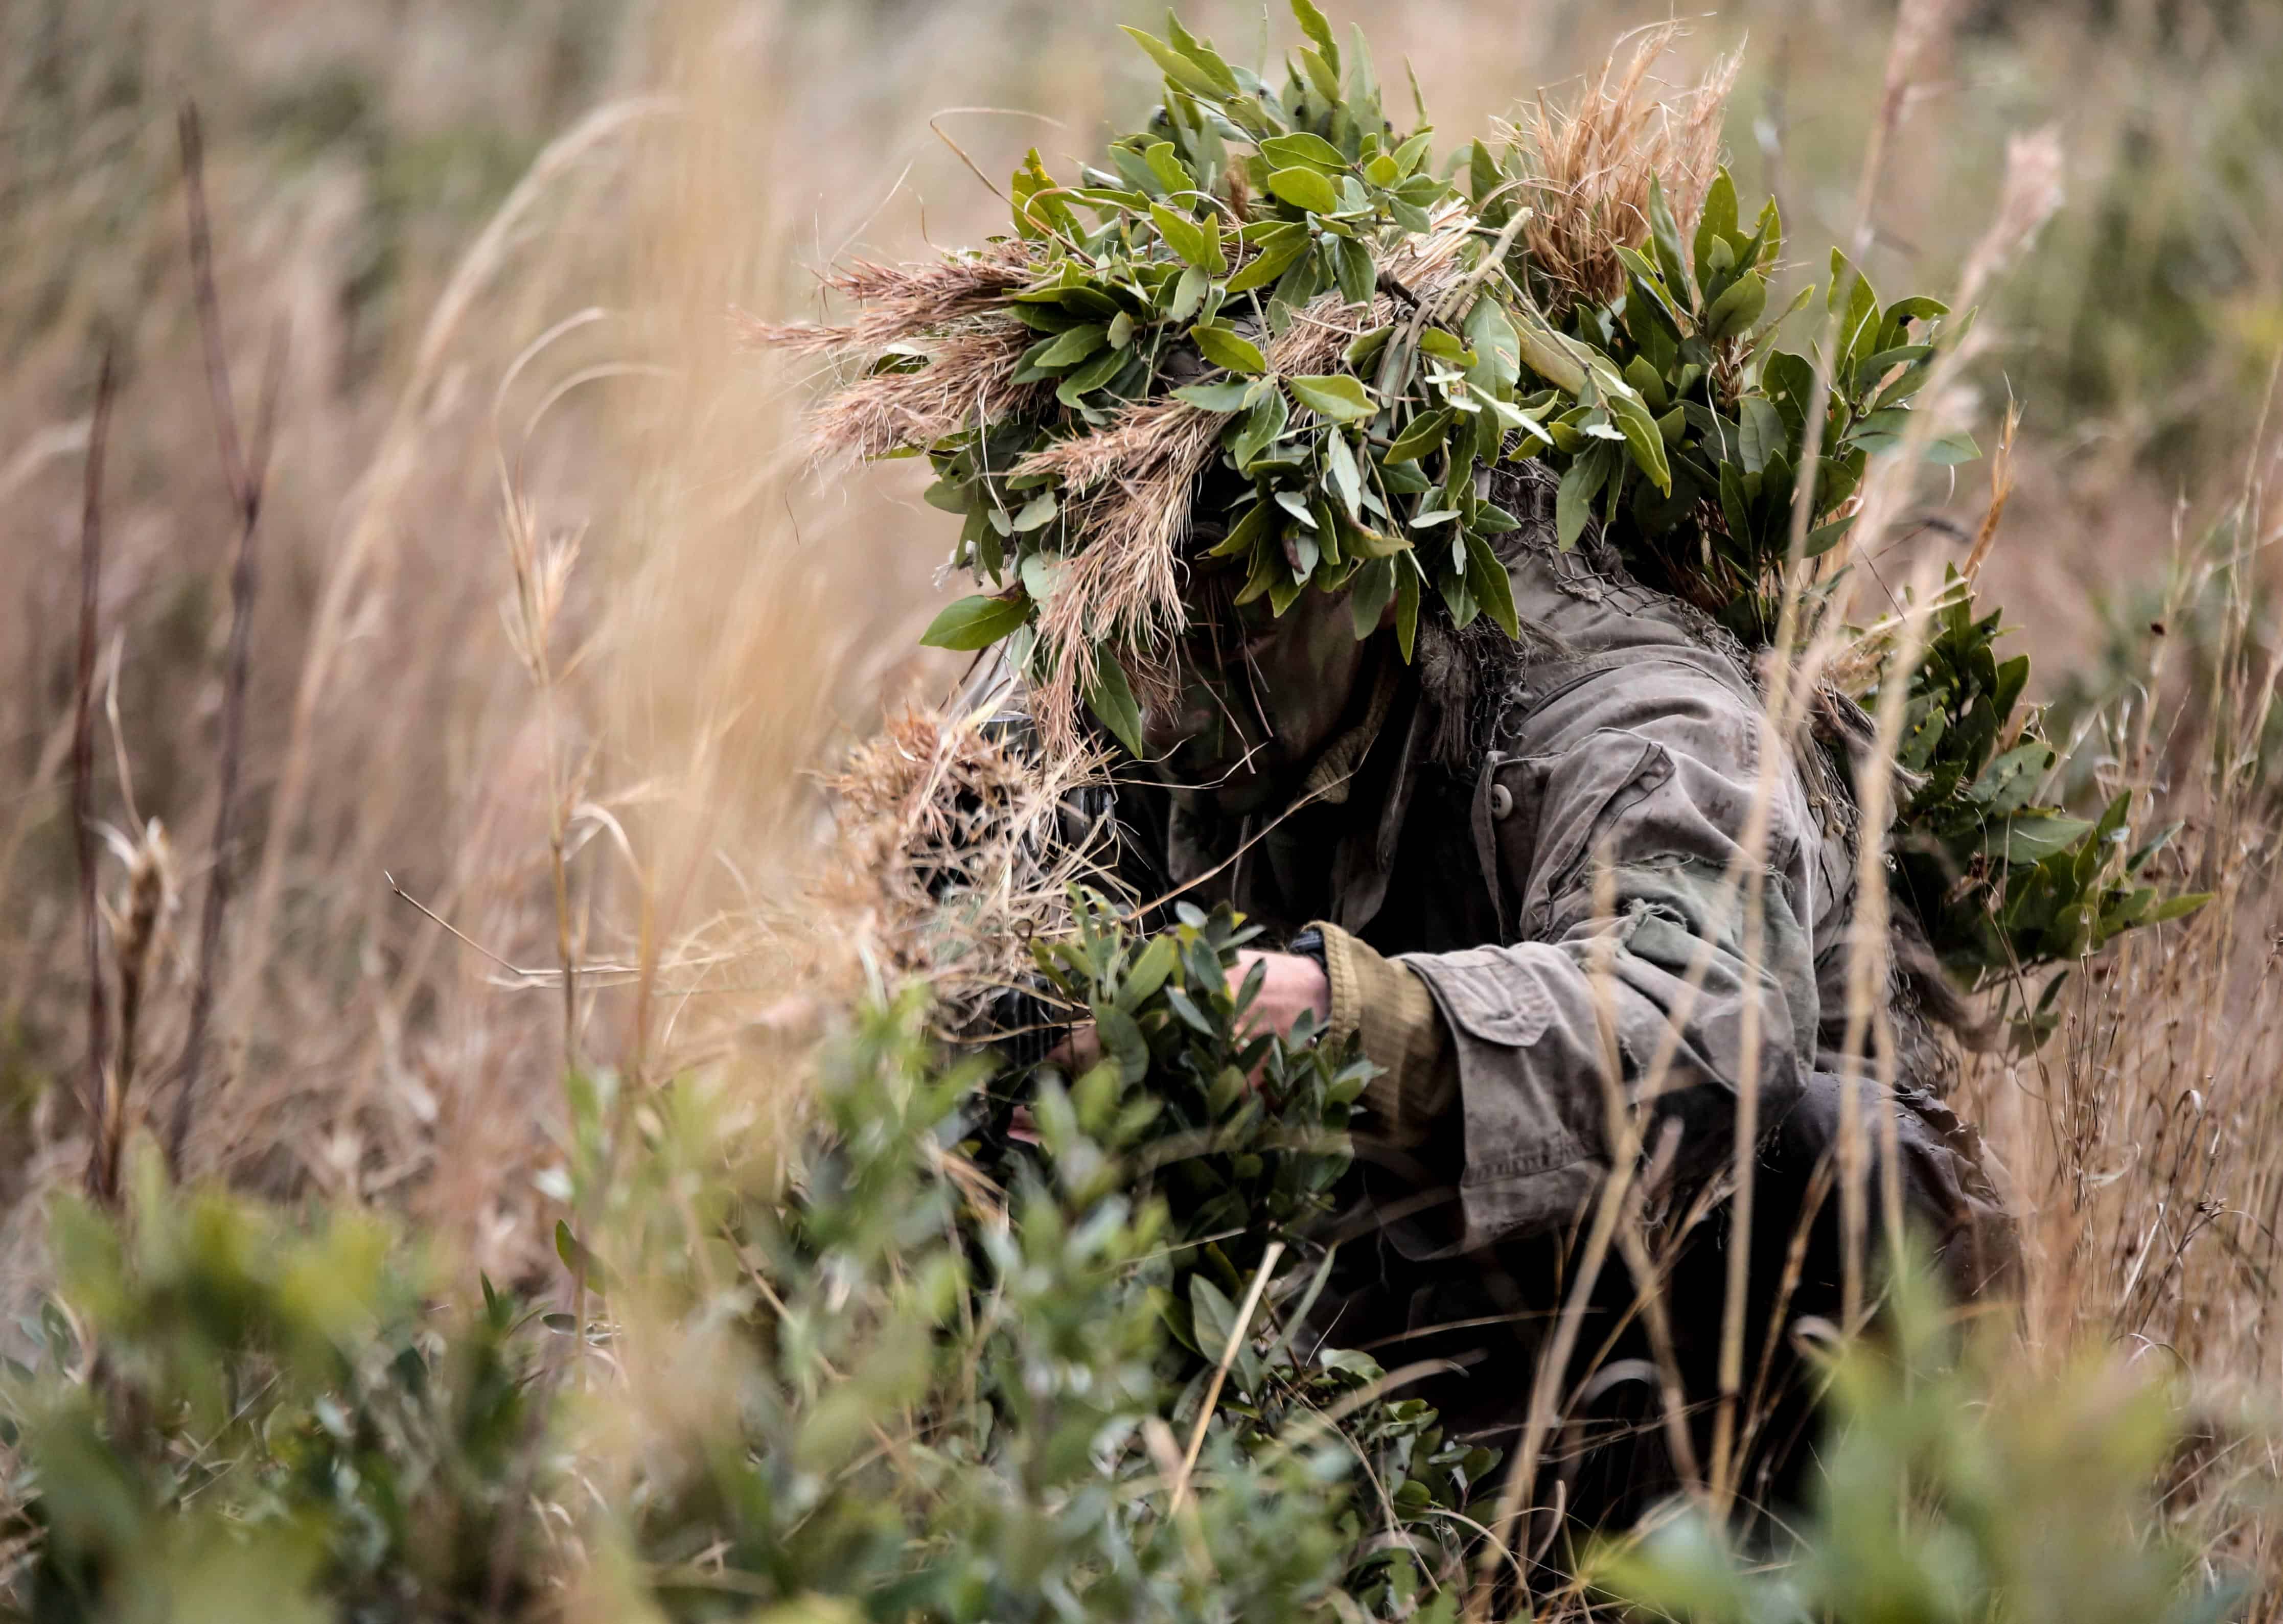 A Marine student undergoing the 2nd Marine Division Combat Skills Center’s Pre-Scout Sniper Course prepares to move during a stalking exercise at Camp Lejeune, N.C., Jan. 22, 2016. The exercise required students to traverse approximately 1,000 meters of high grass and fire on a target, all without being detected. (U.S. Marine Corps photo by Cpl. Paul S. Martinez/Released)